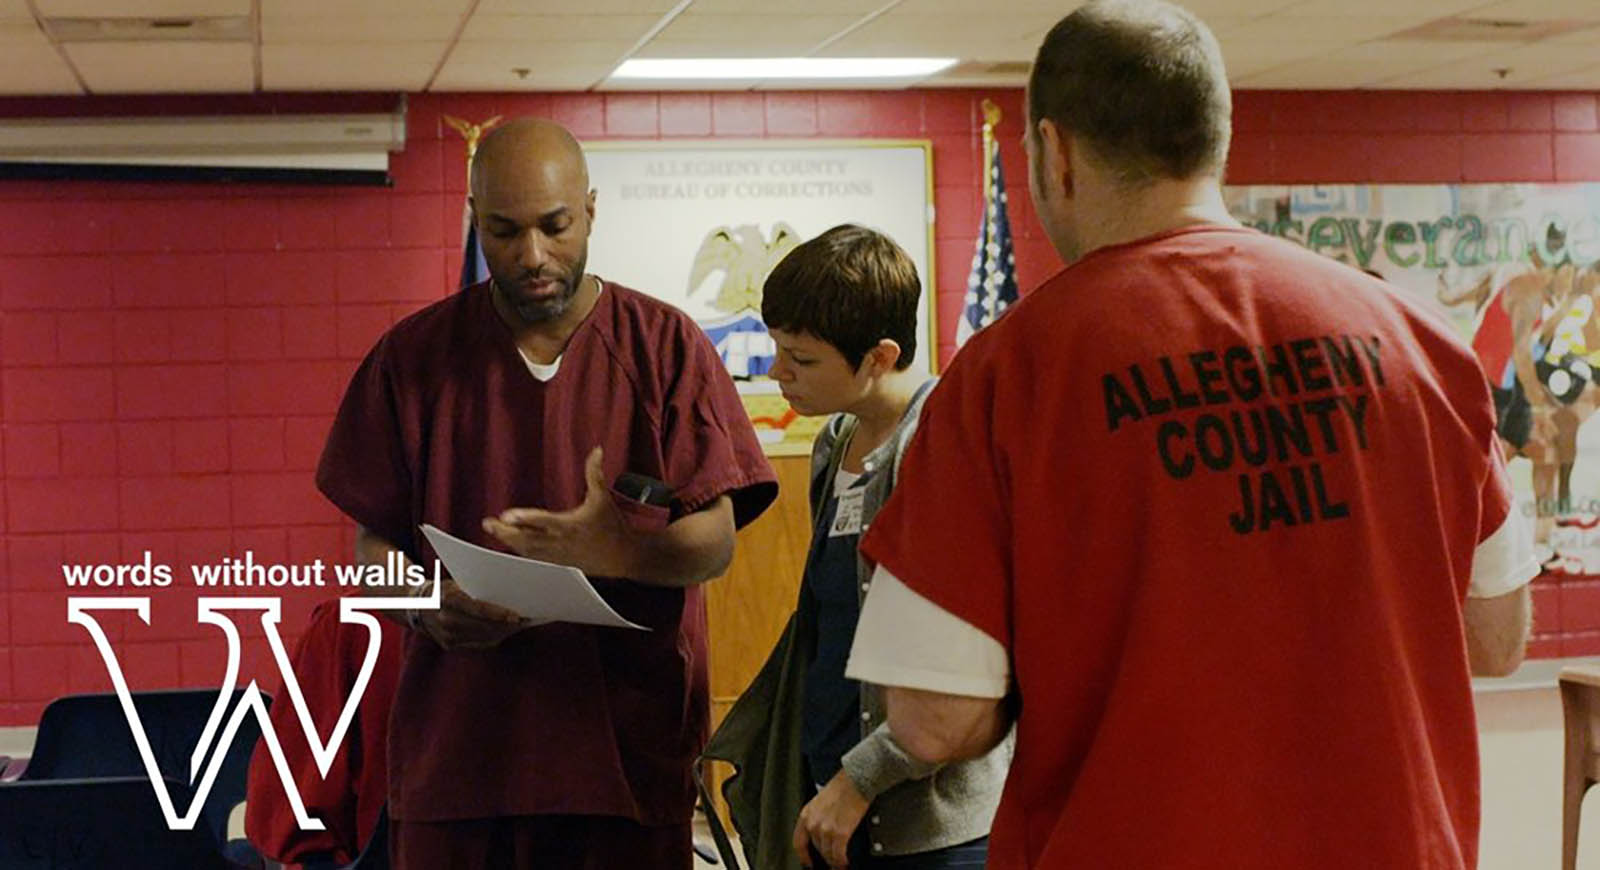 Photo from Allegheny County Jail, of incarcerated people working with a Chatham University student volunteering through Words Without Walls.